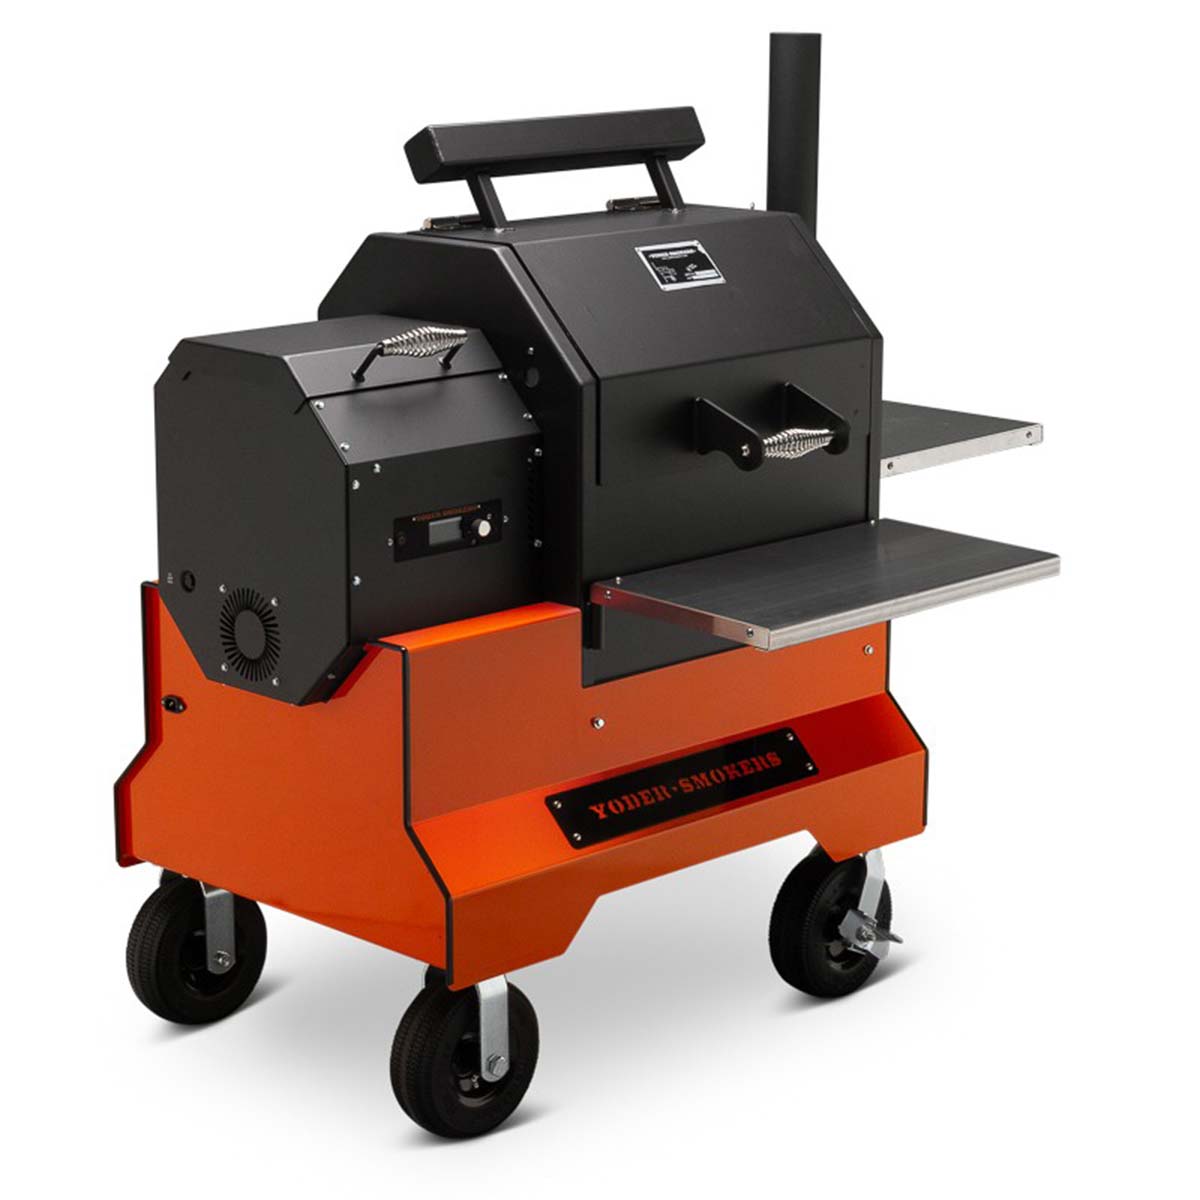 Yoder Smokers YS480s